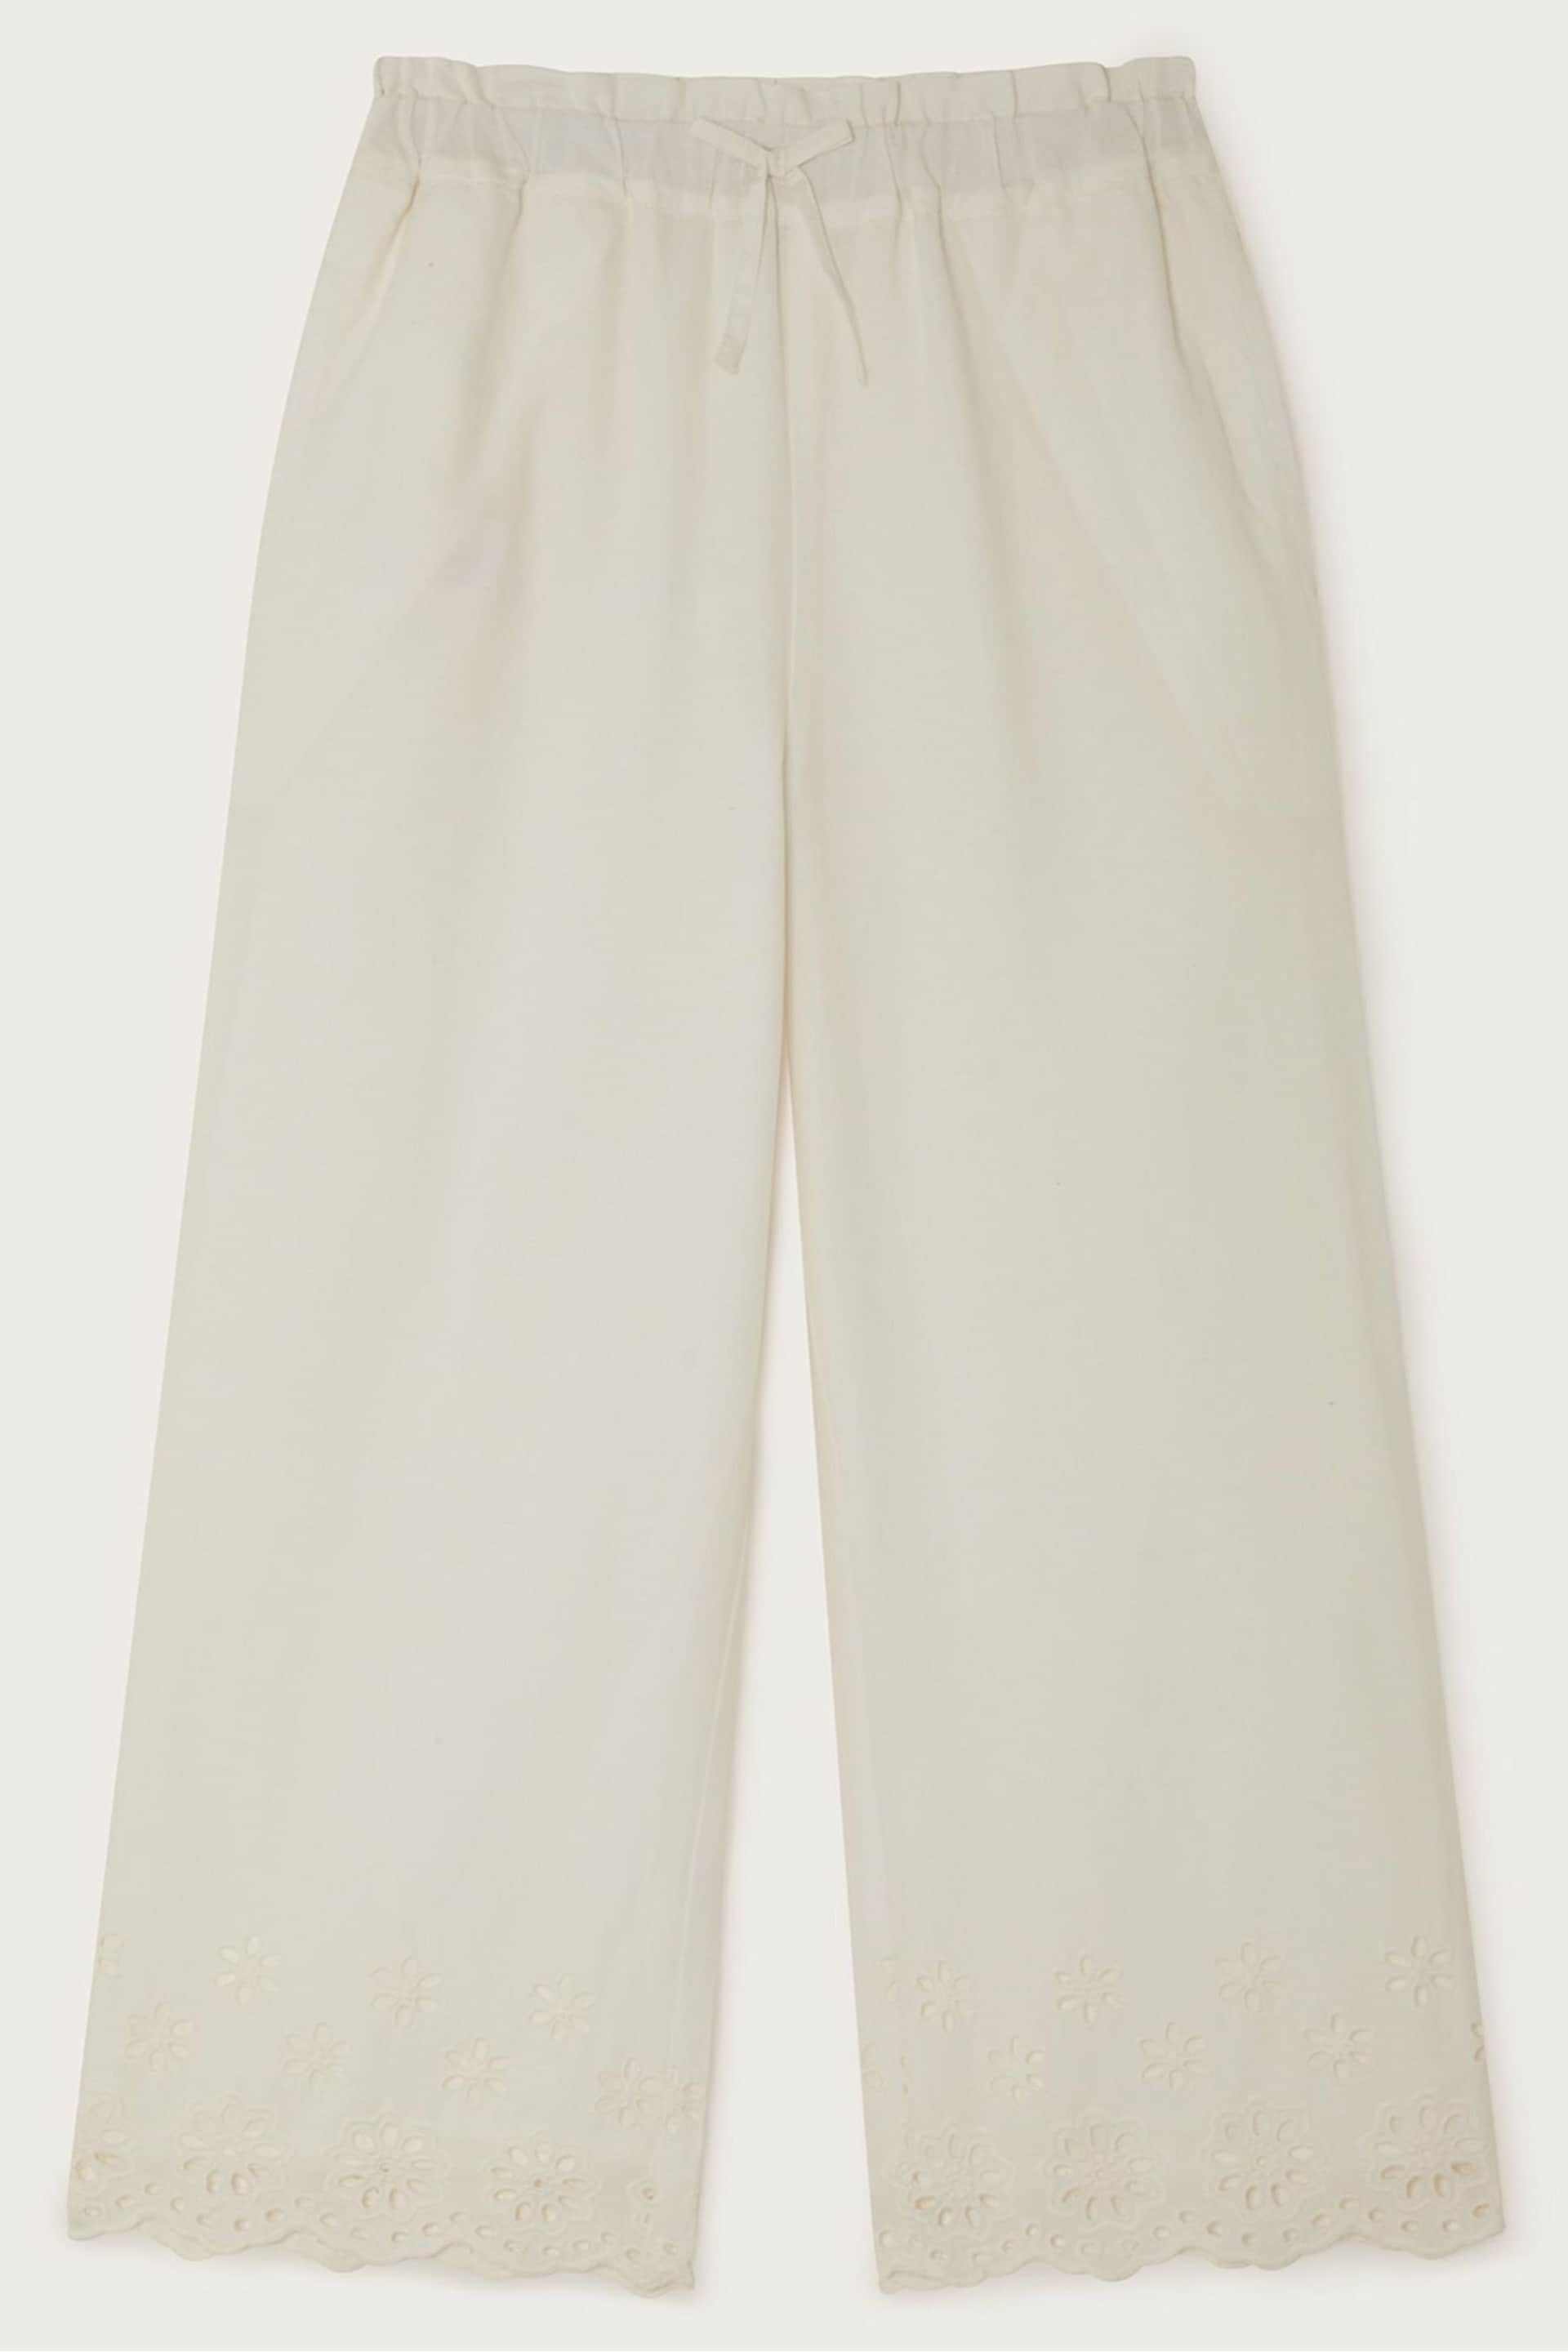 Monsoon Natural Broderie Trousers - Image 2 of 4